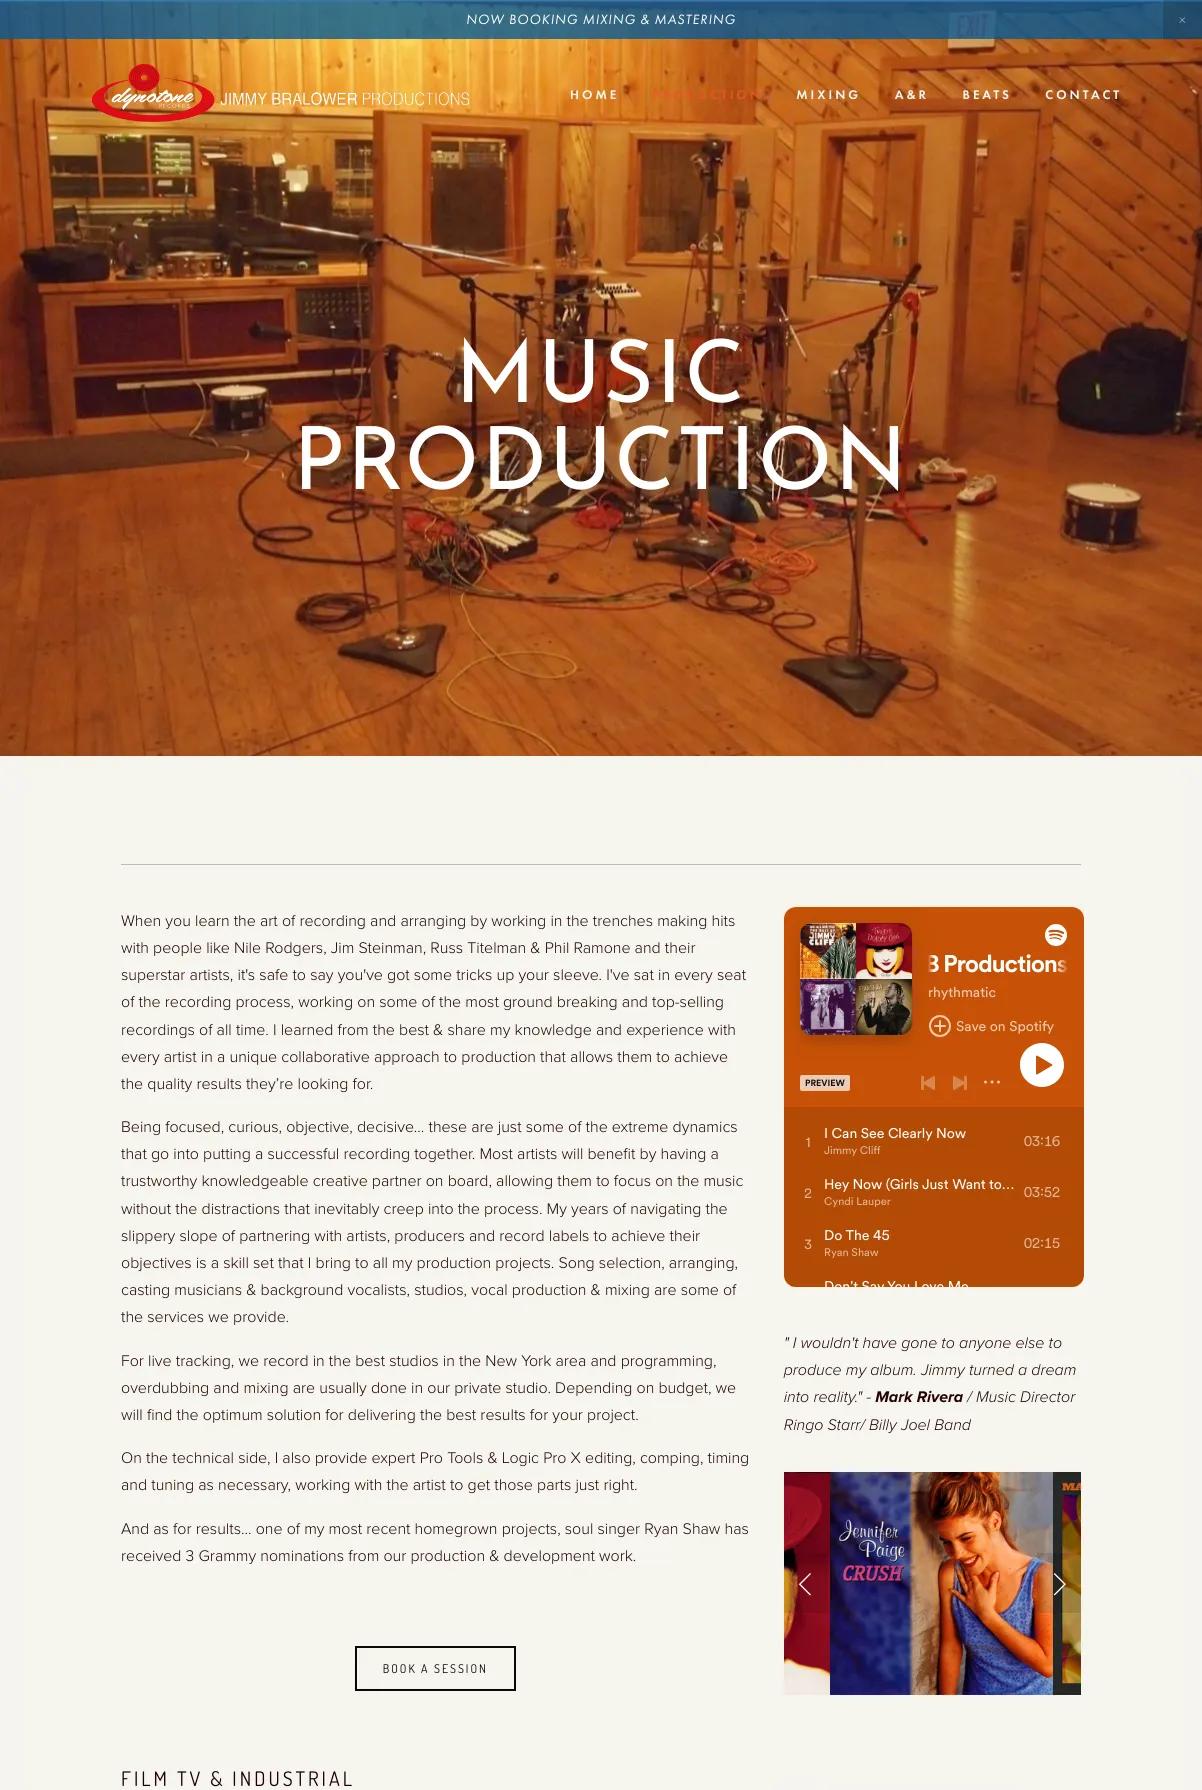 Screenshot 2 of Jimmy Bralower Productions (Example Squarespace Music Producer Website)